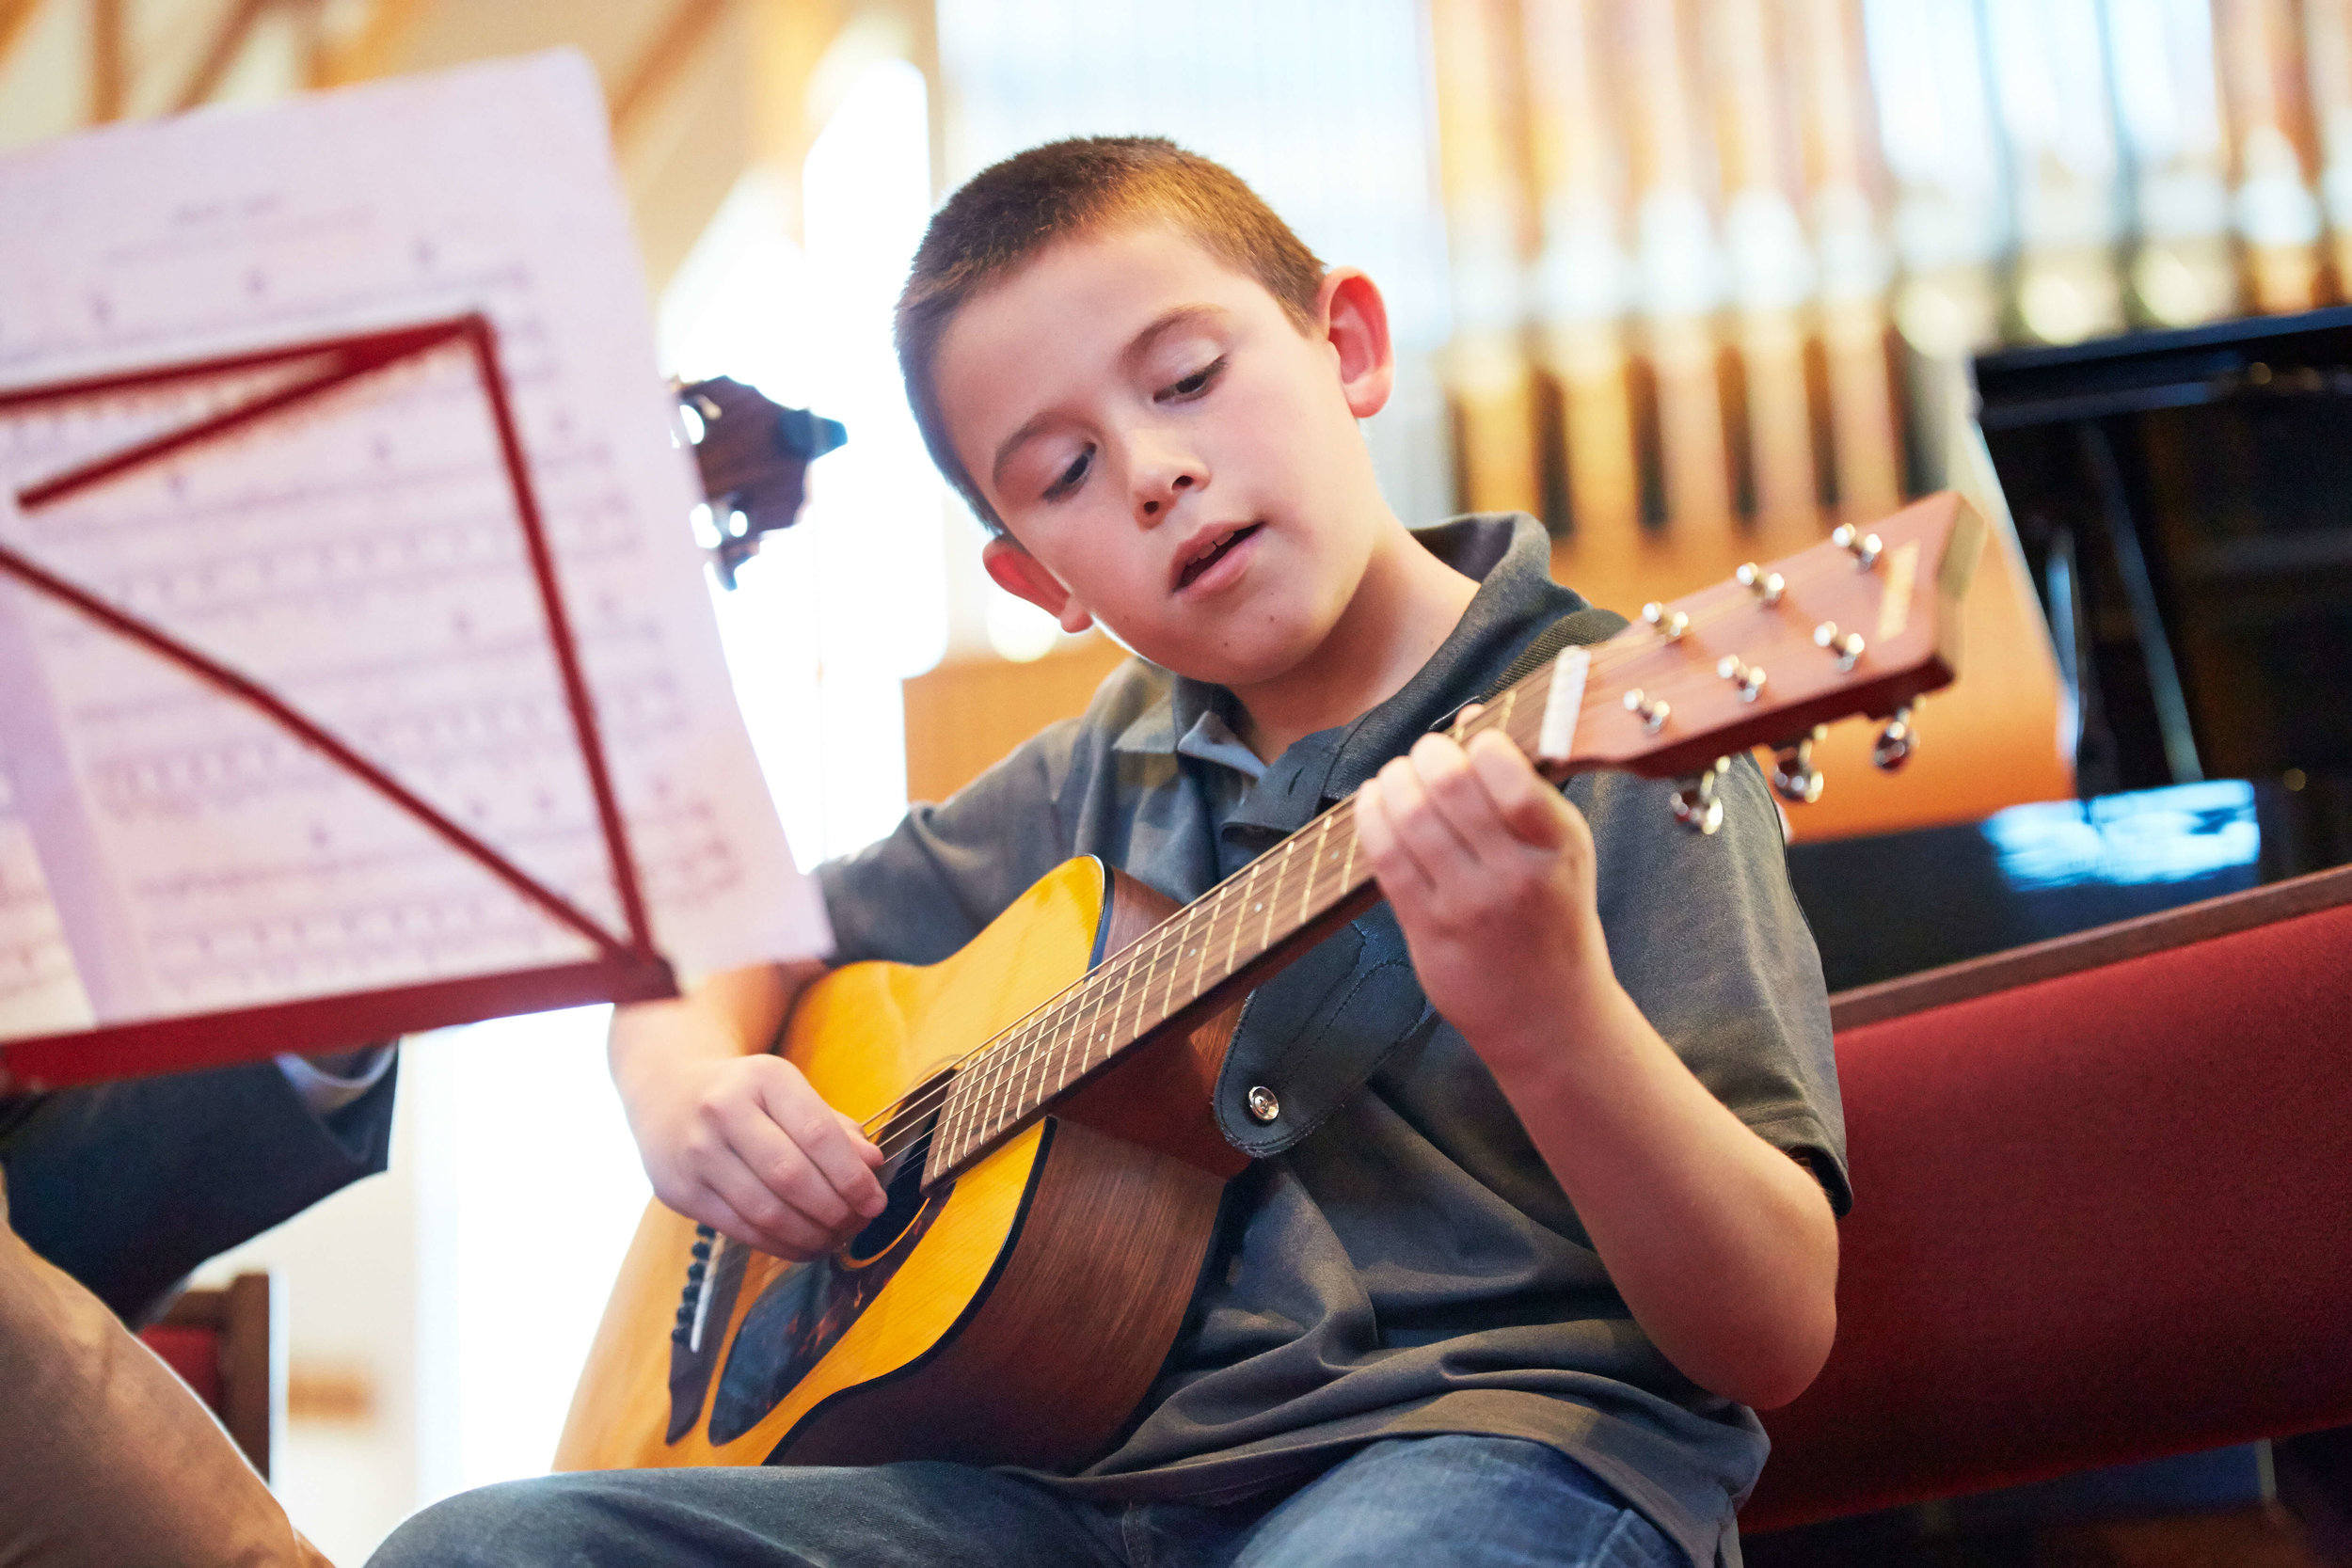   GUITAR LESSONS IN CINCINNATI   for beginner, intermediate, and advanced students of all ages  CALL  513-560-9175  TODAY TO SCHEDULE YOUR FIRST LESSON   Request Info  